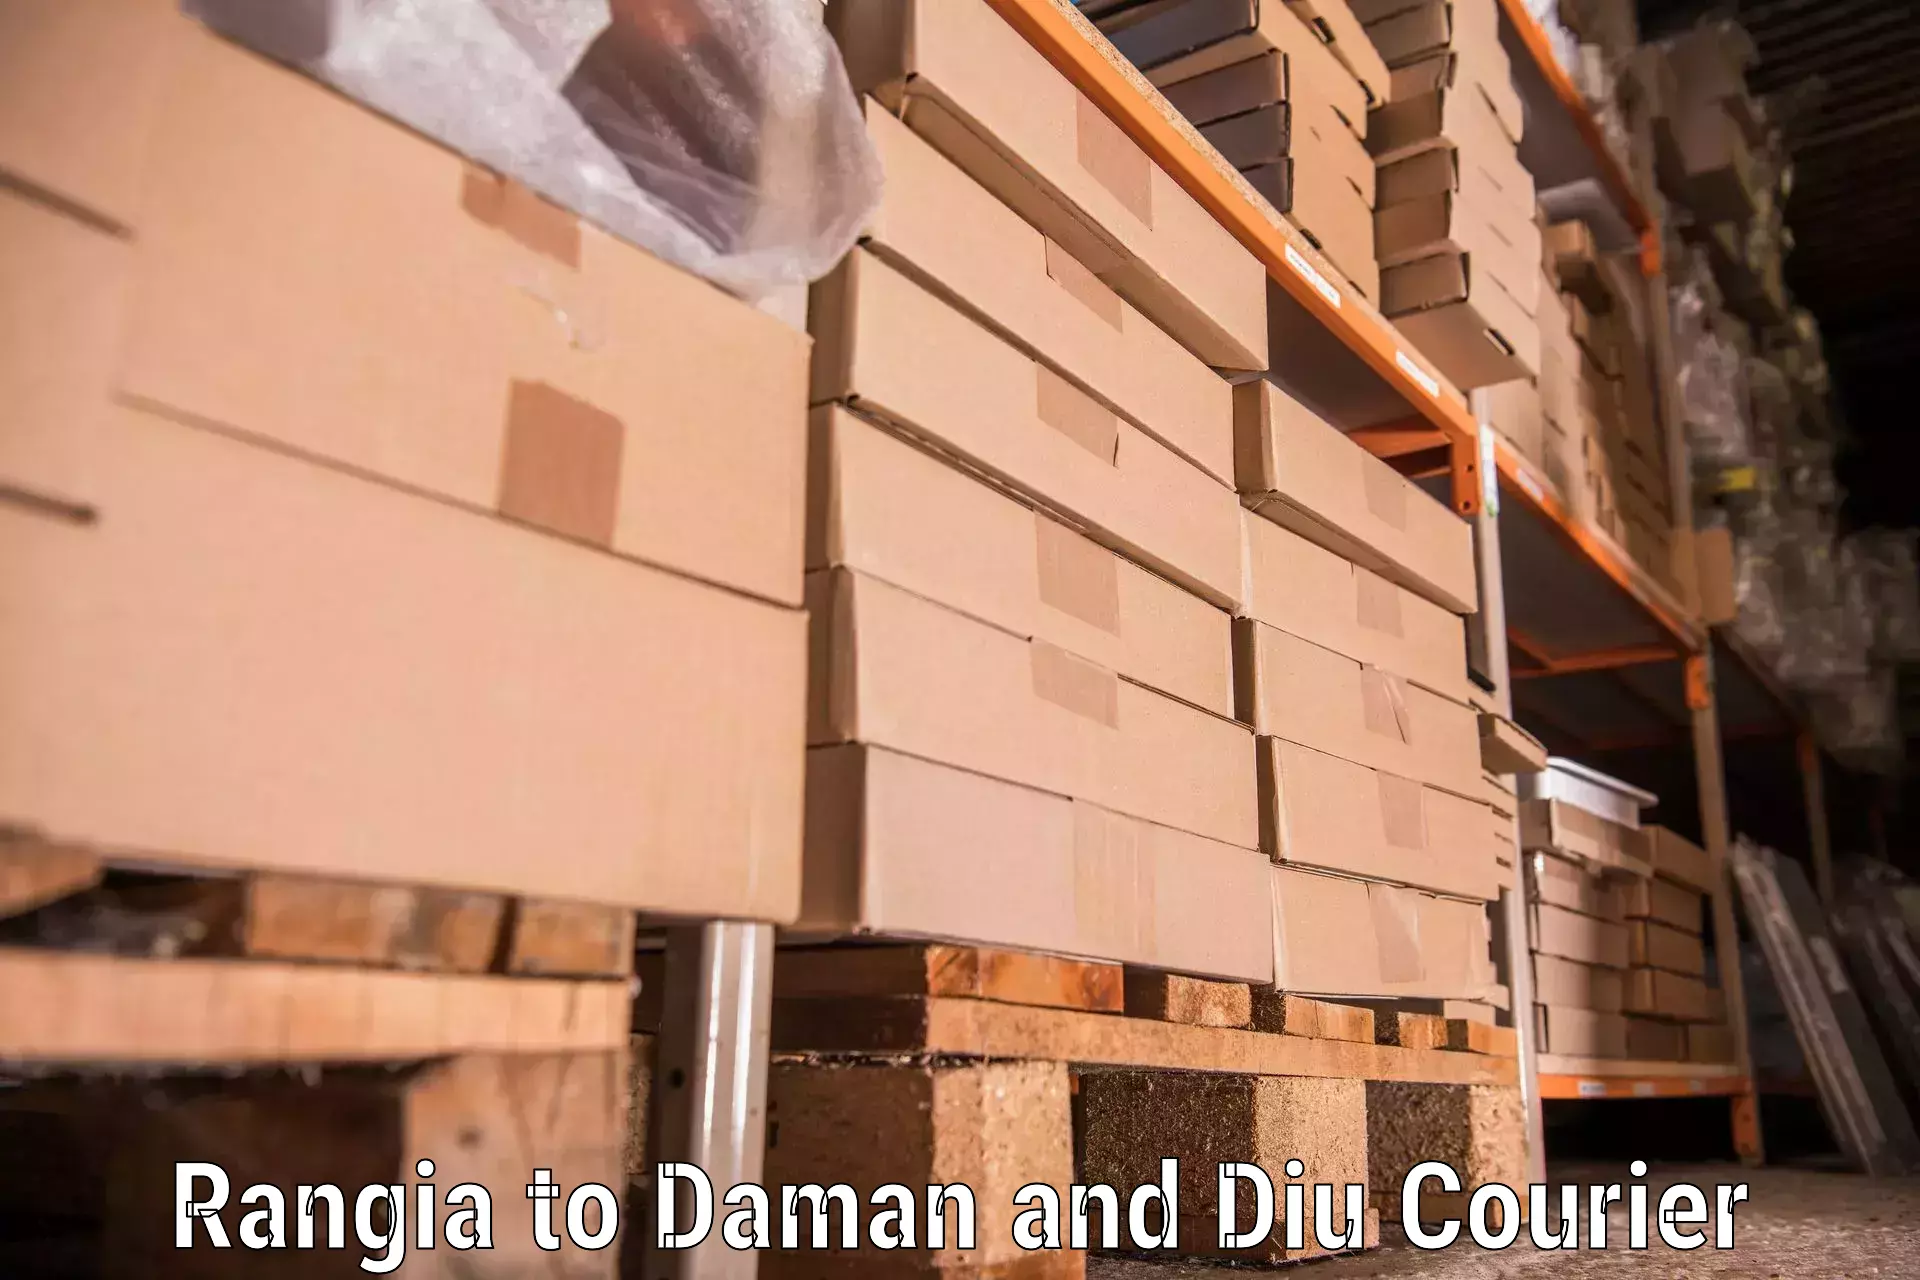 Tailored moving services in Rangia to Diu